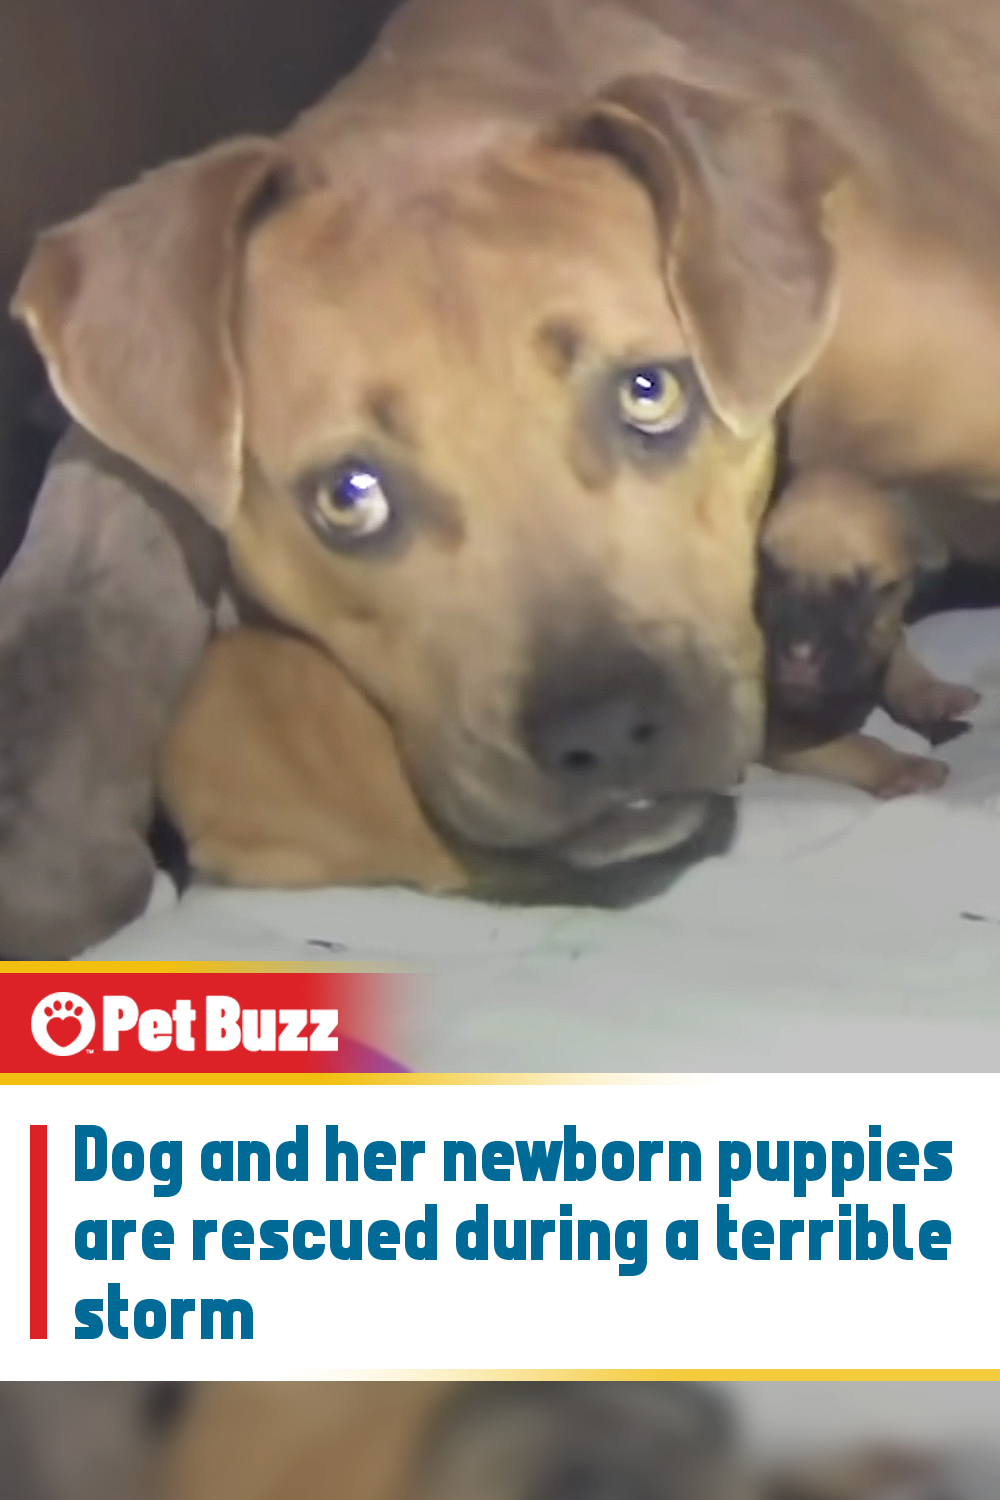 Dog and her newborn puppies are rescued during a terrible storm